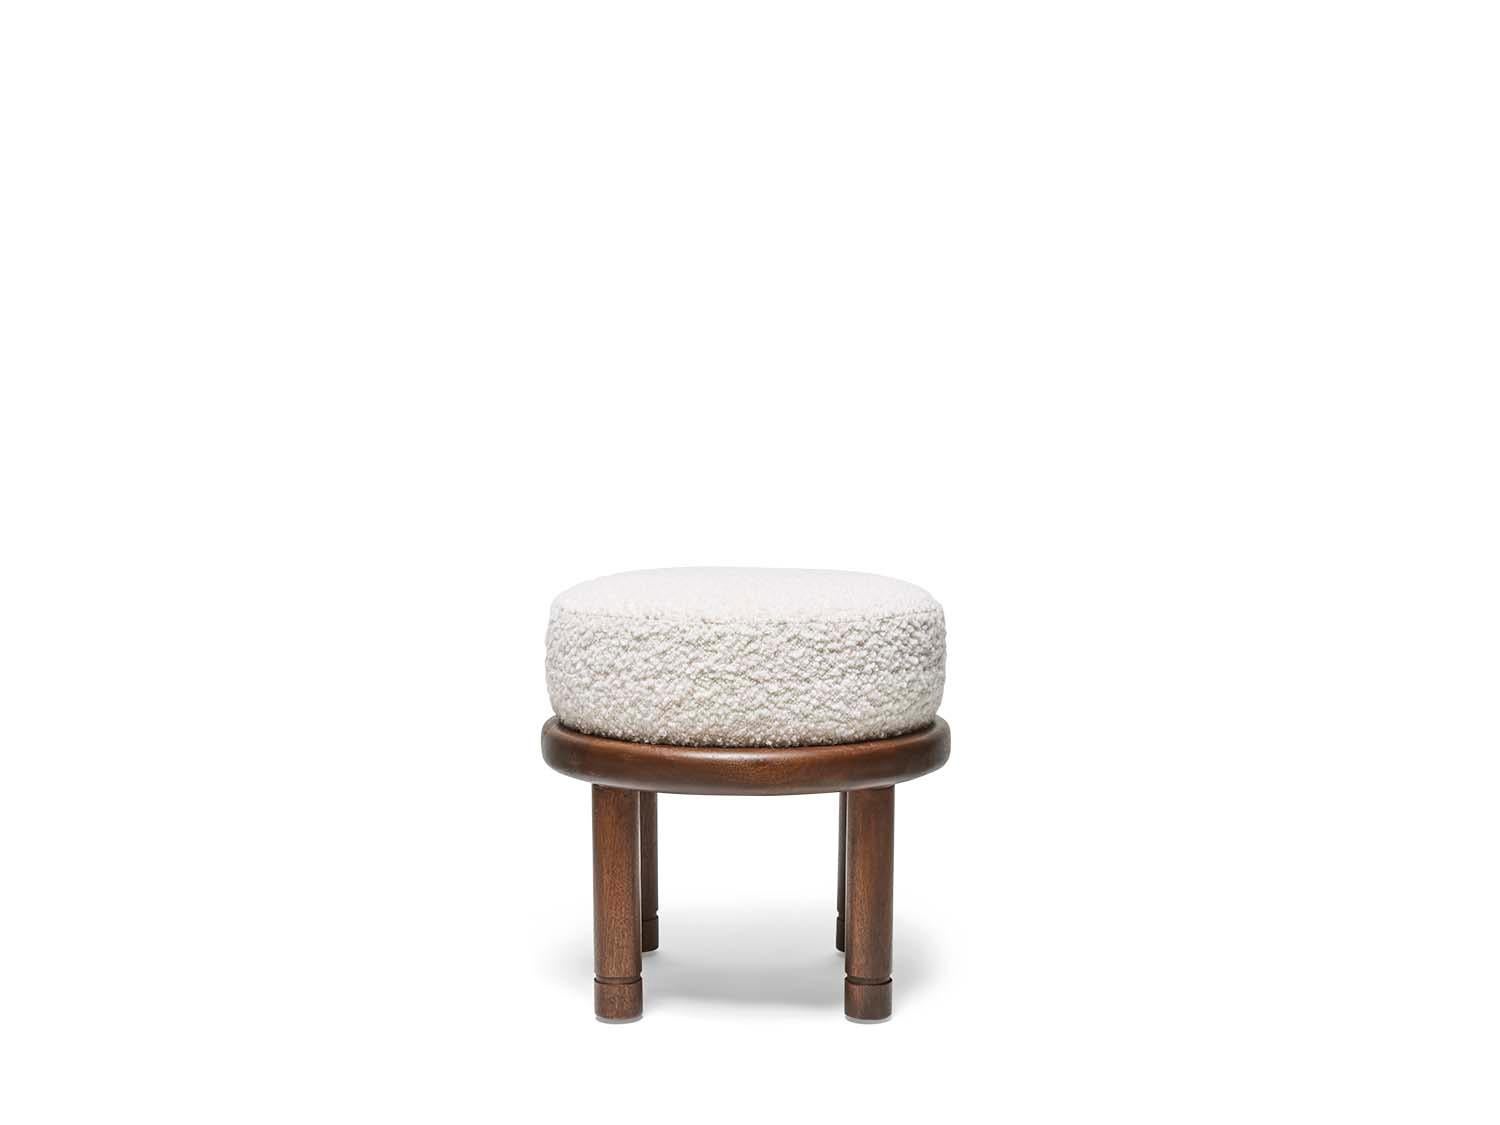 The Petite Moreno Ottoman features a round solid wood base with four cylindrical legs and an upholstered top. Available in American walnut or white oak. 

The Lawson-Fenning Collection is designed and handmade in Los Angeles, California. Reach out